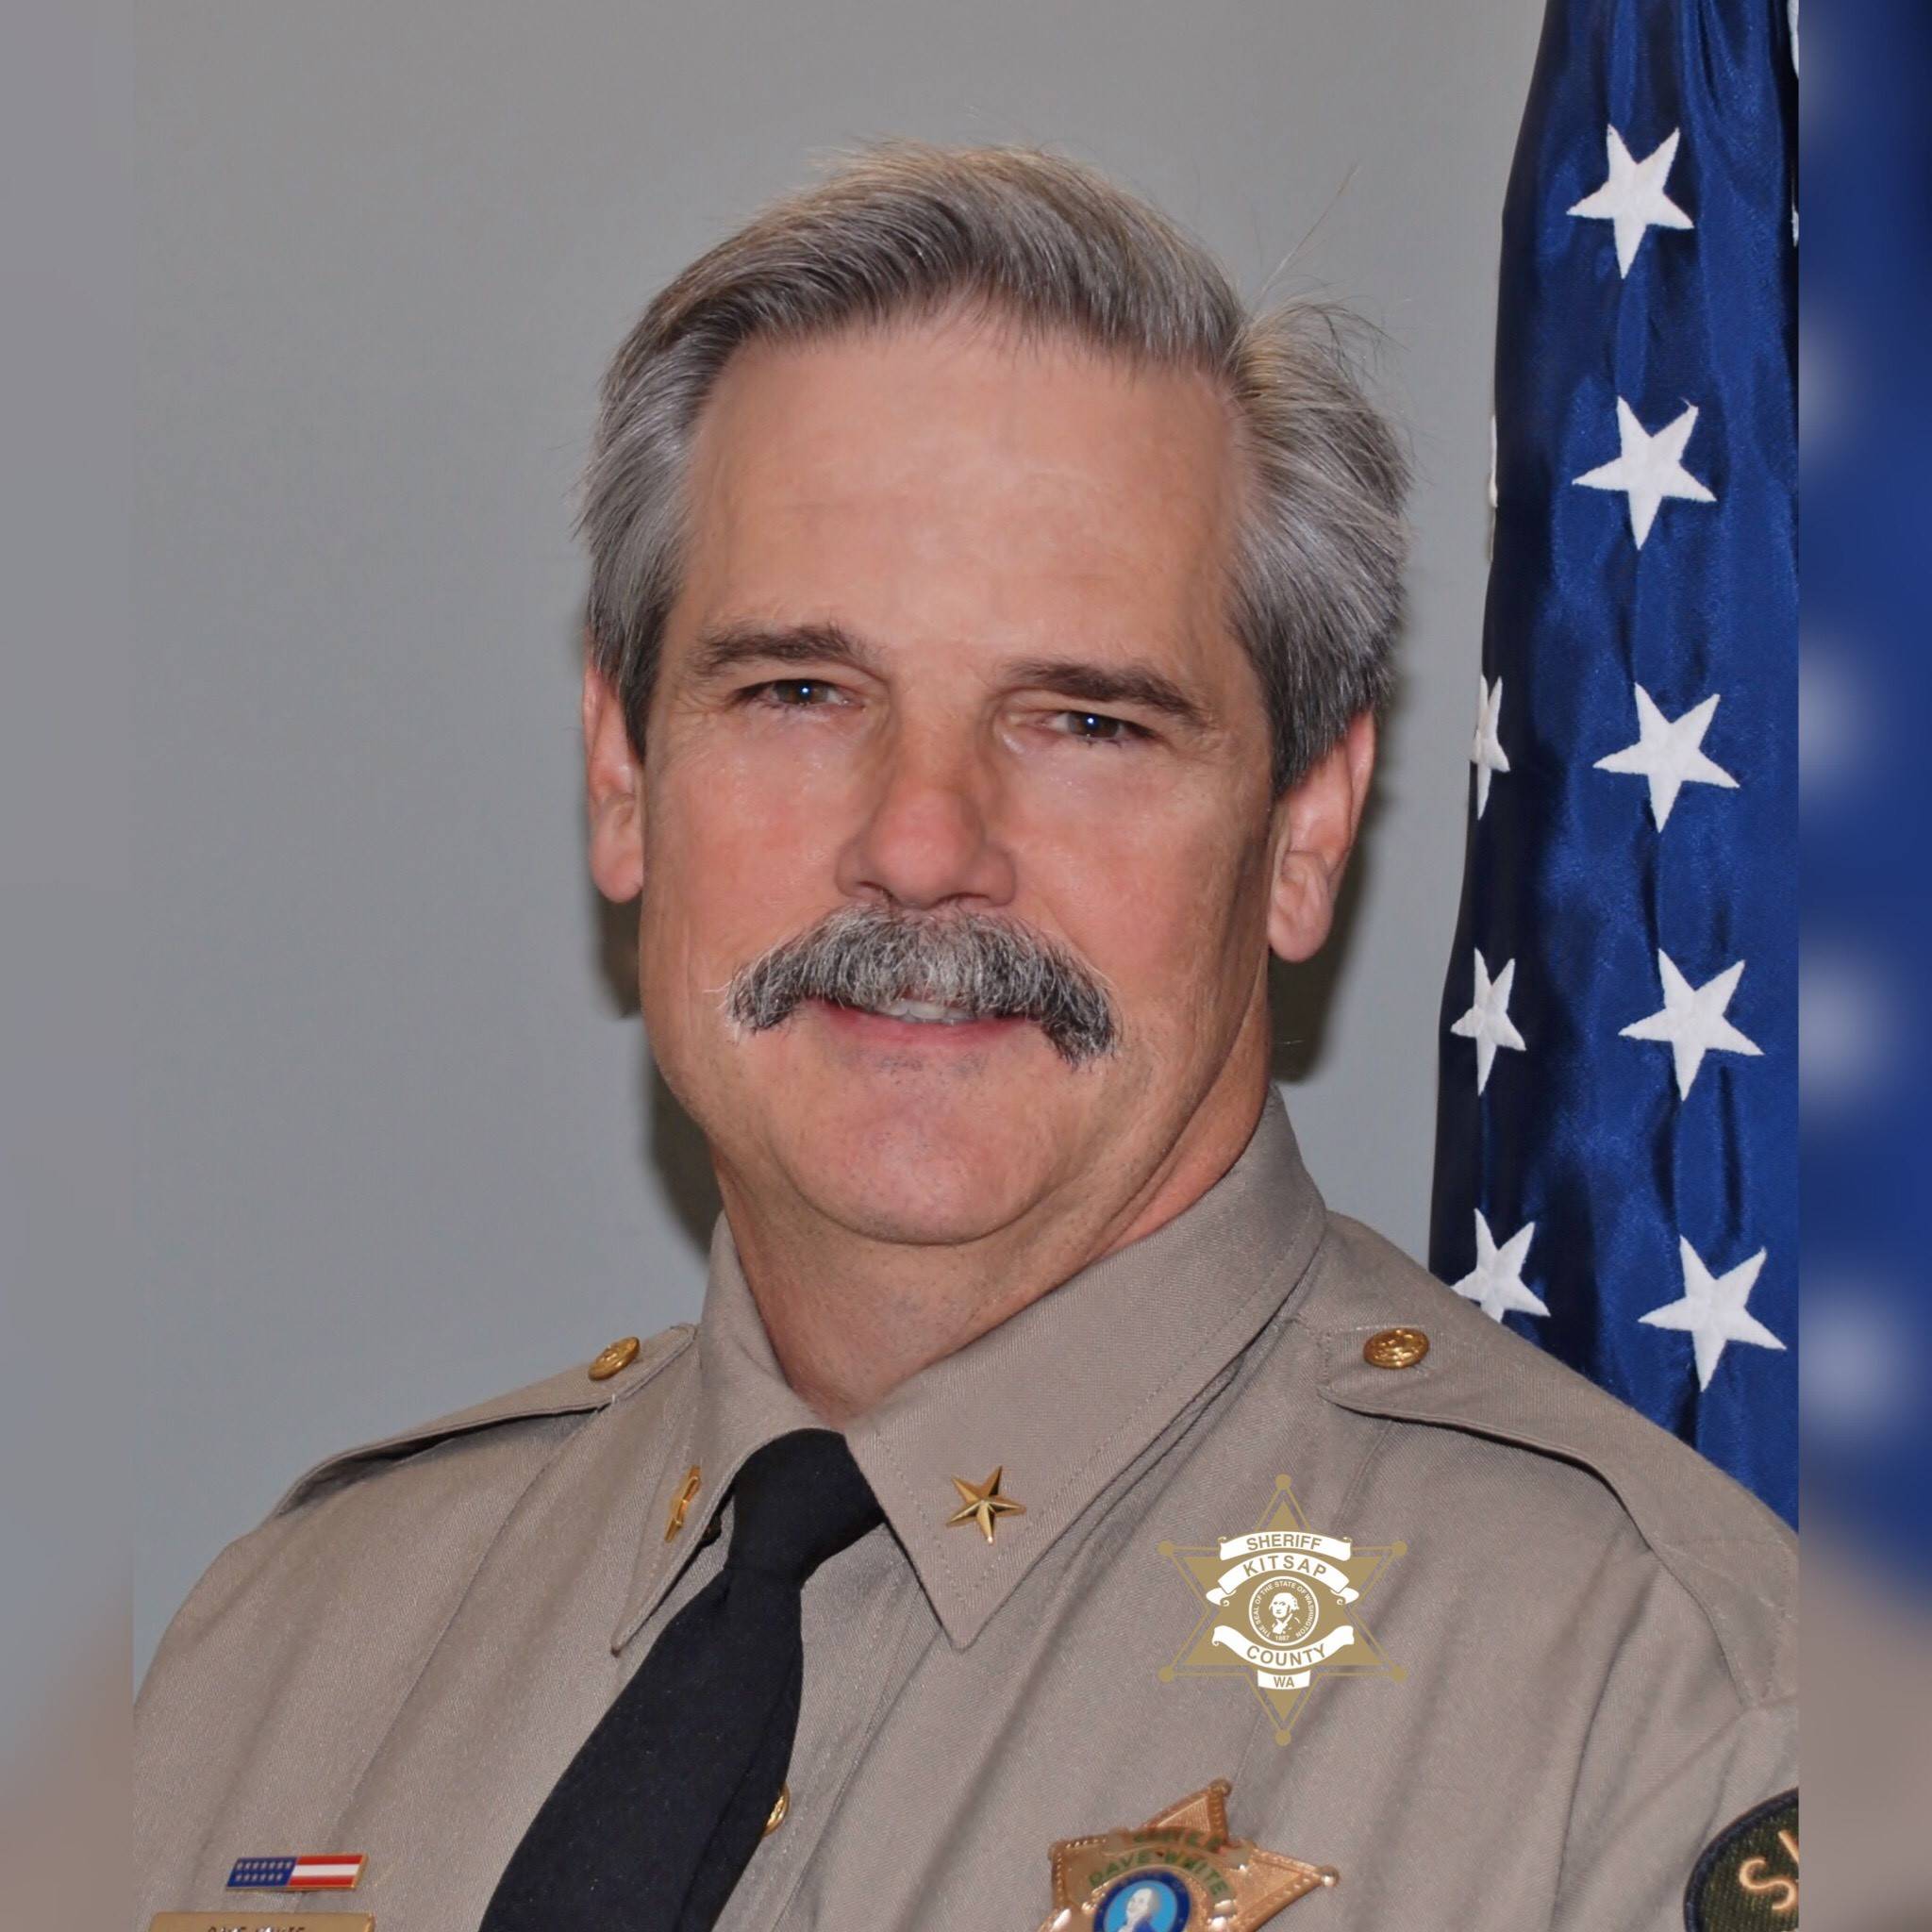 Chief detective retires after record 40 years Kitsap sheriff’s office